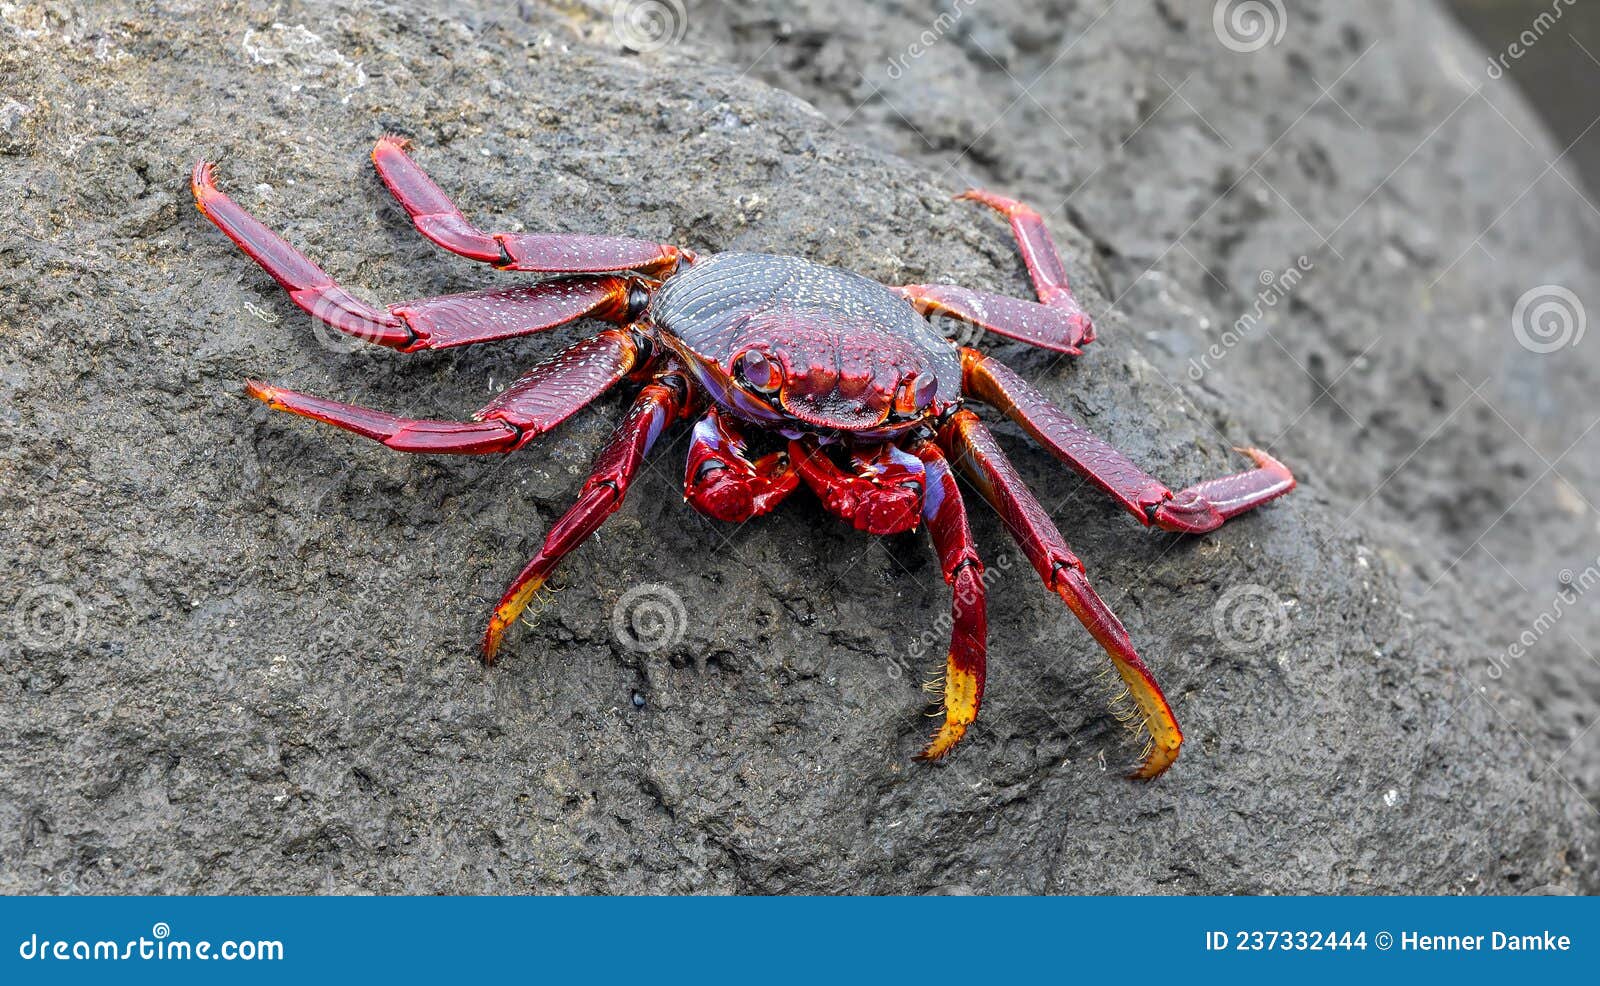 close-up view of the red rock crab grapsus adscensionis